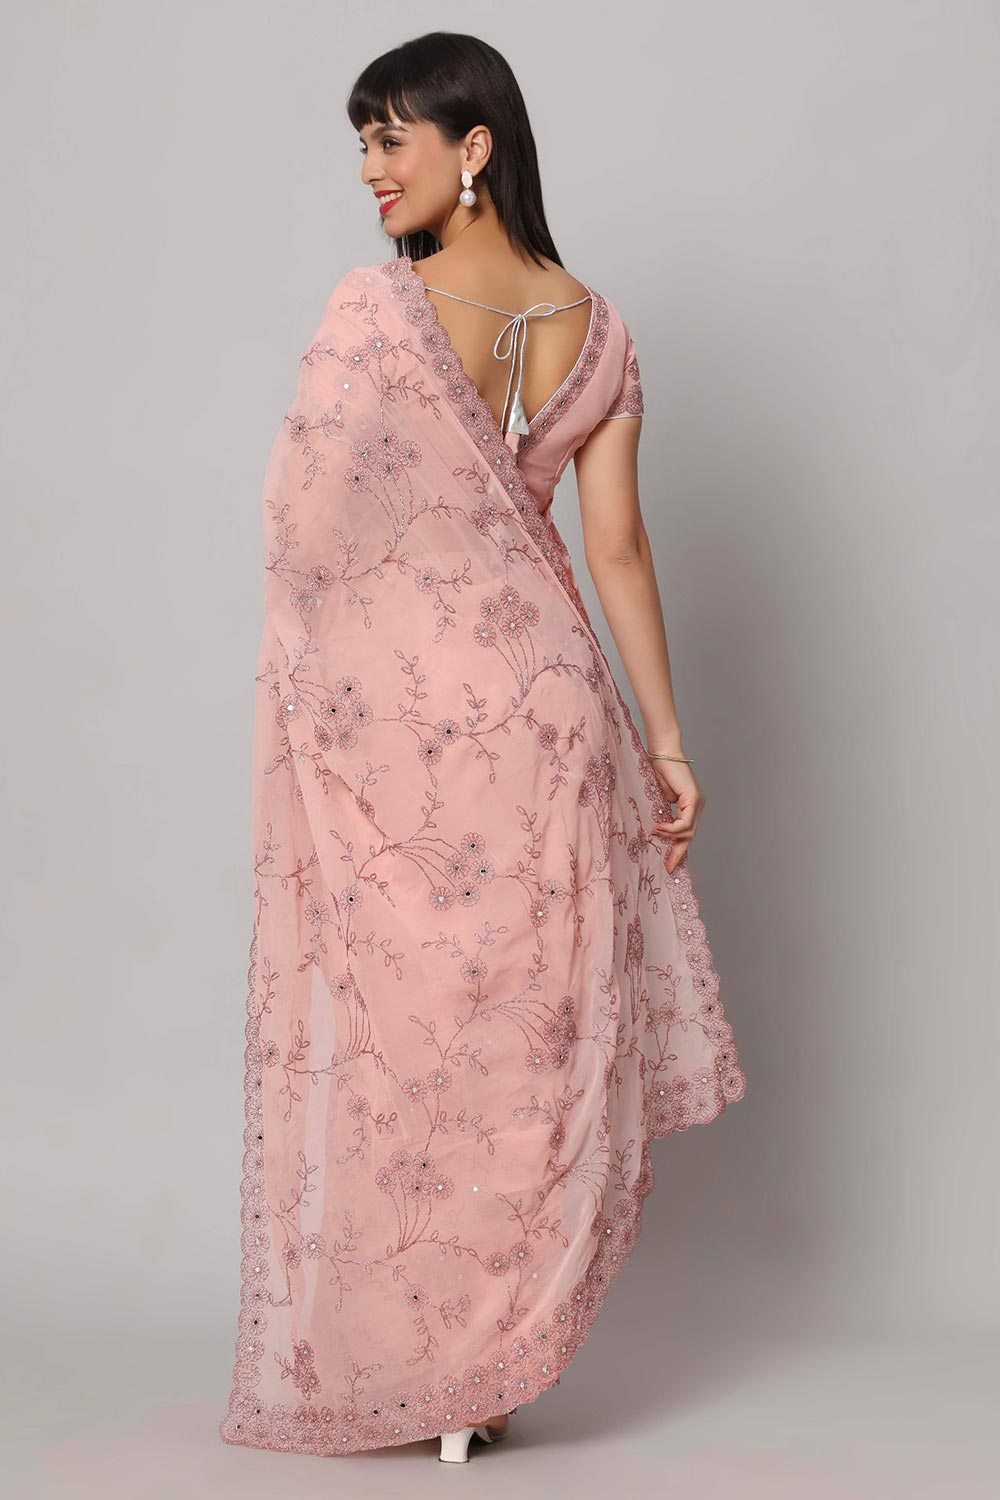 Shop Esha Dusty Rose Embroidered Mirror Work One Minute Saree at best offer at our  Store - One Minute Saree